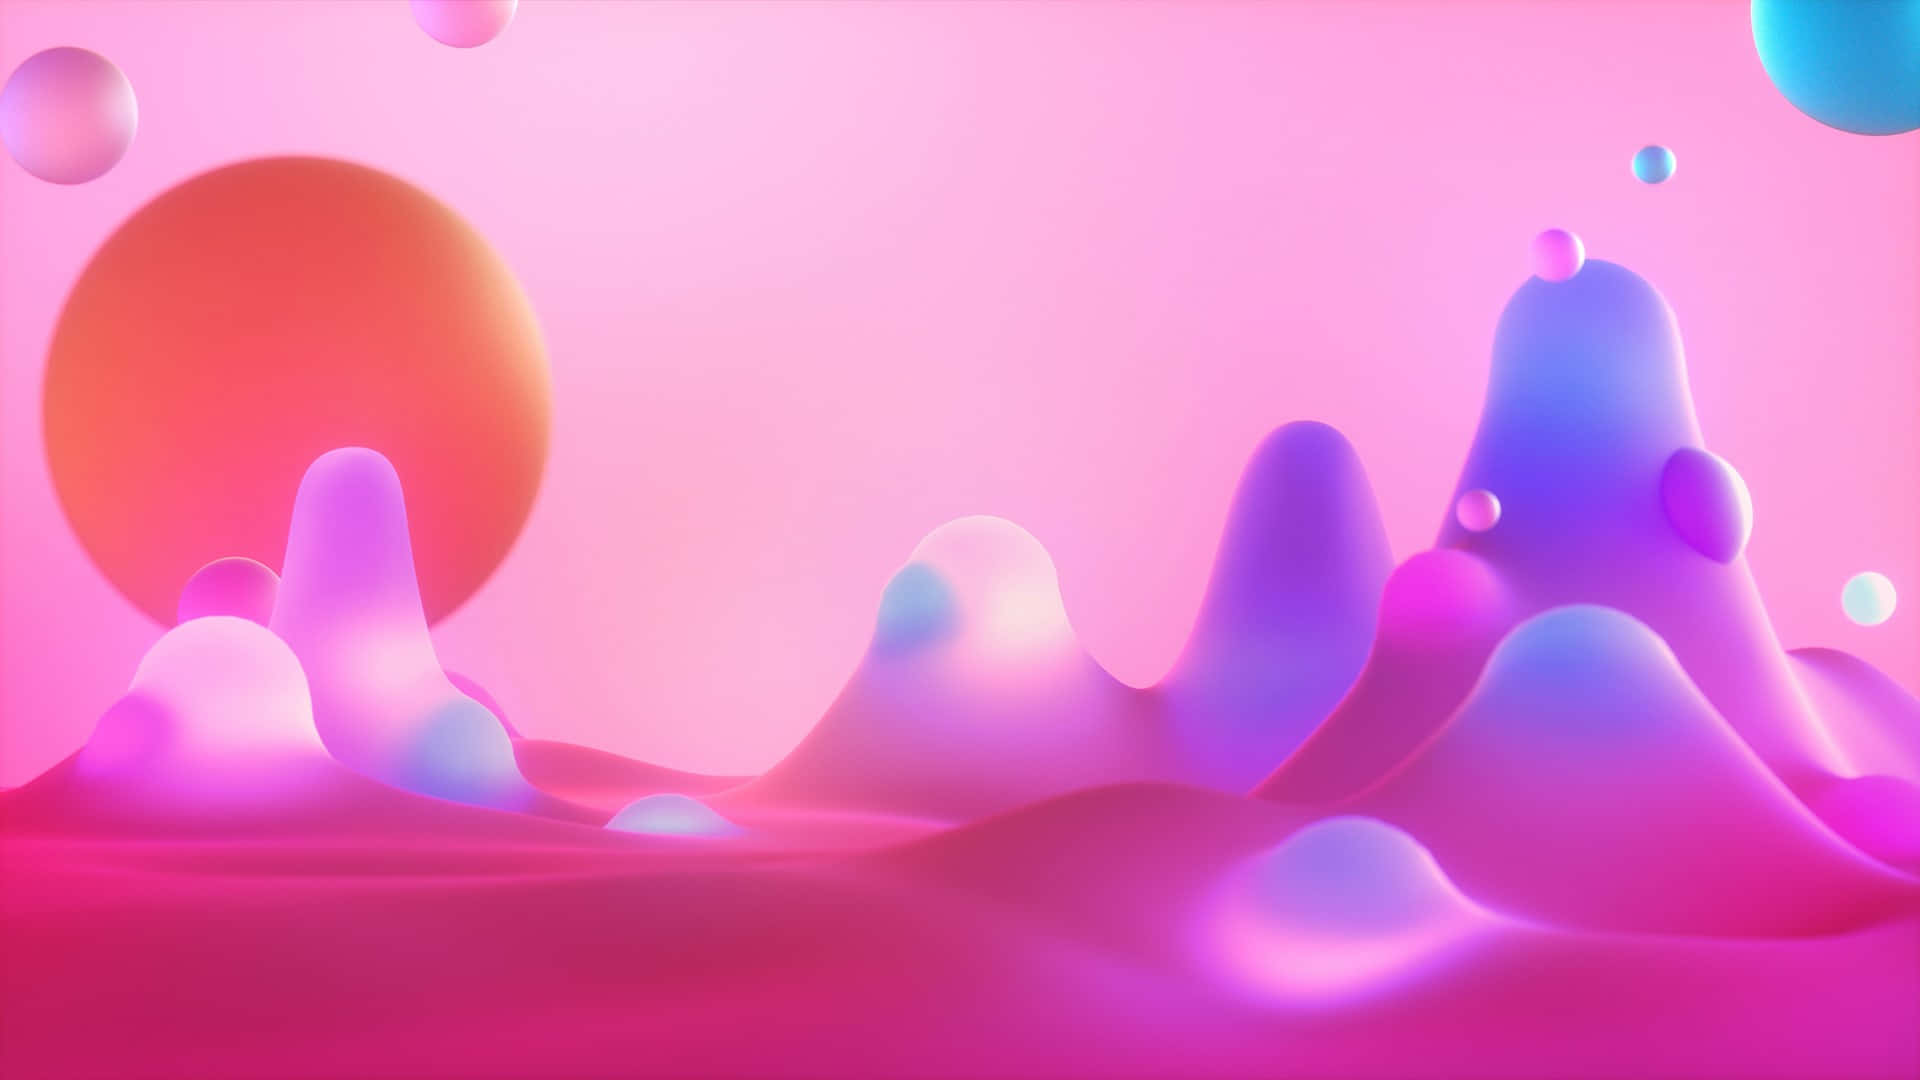 Vibrant Abstract Art with 3D Forms Wallpaper